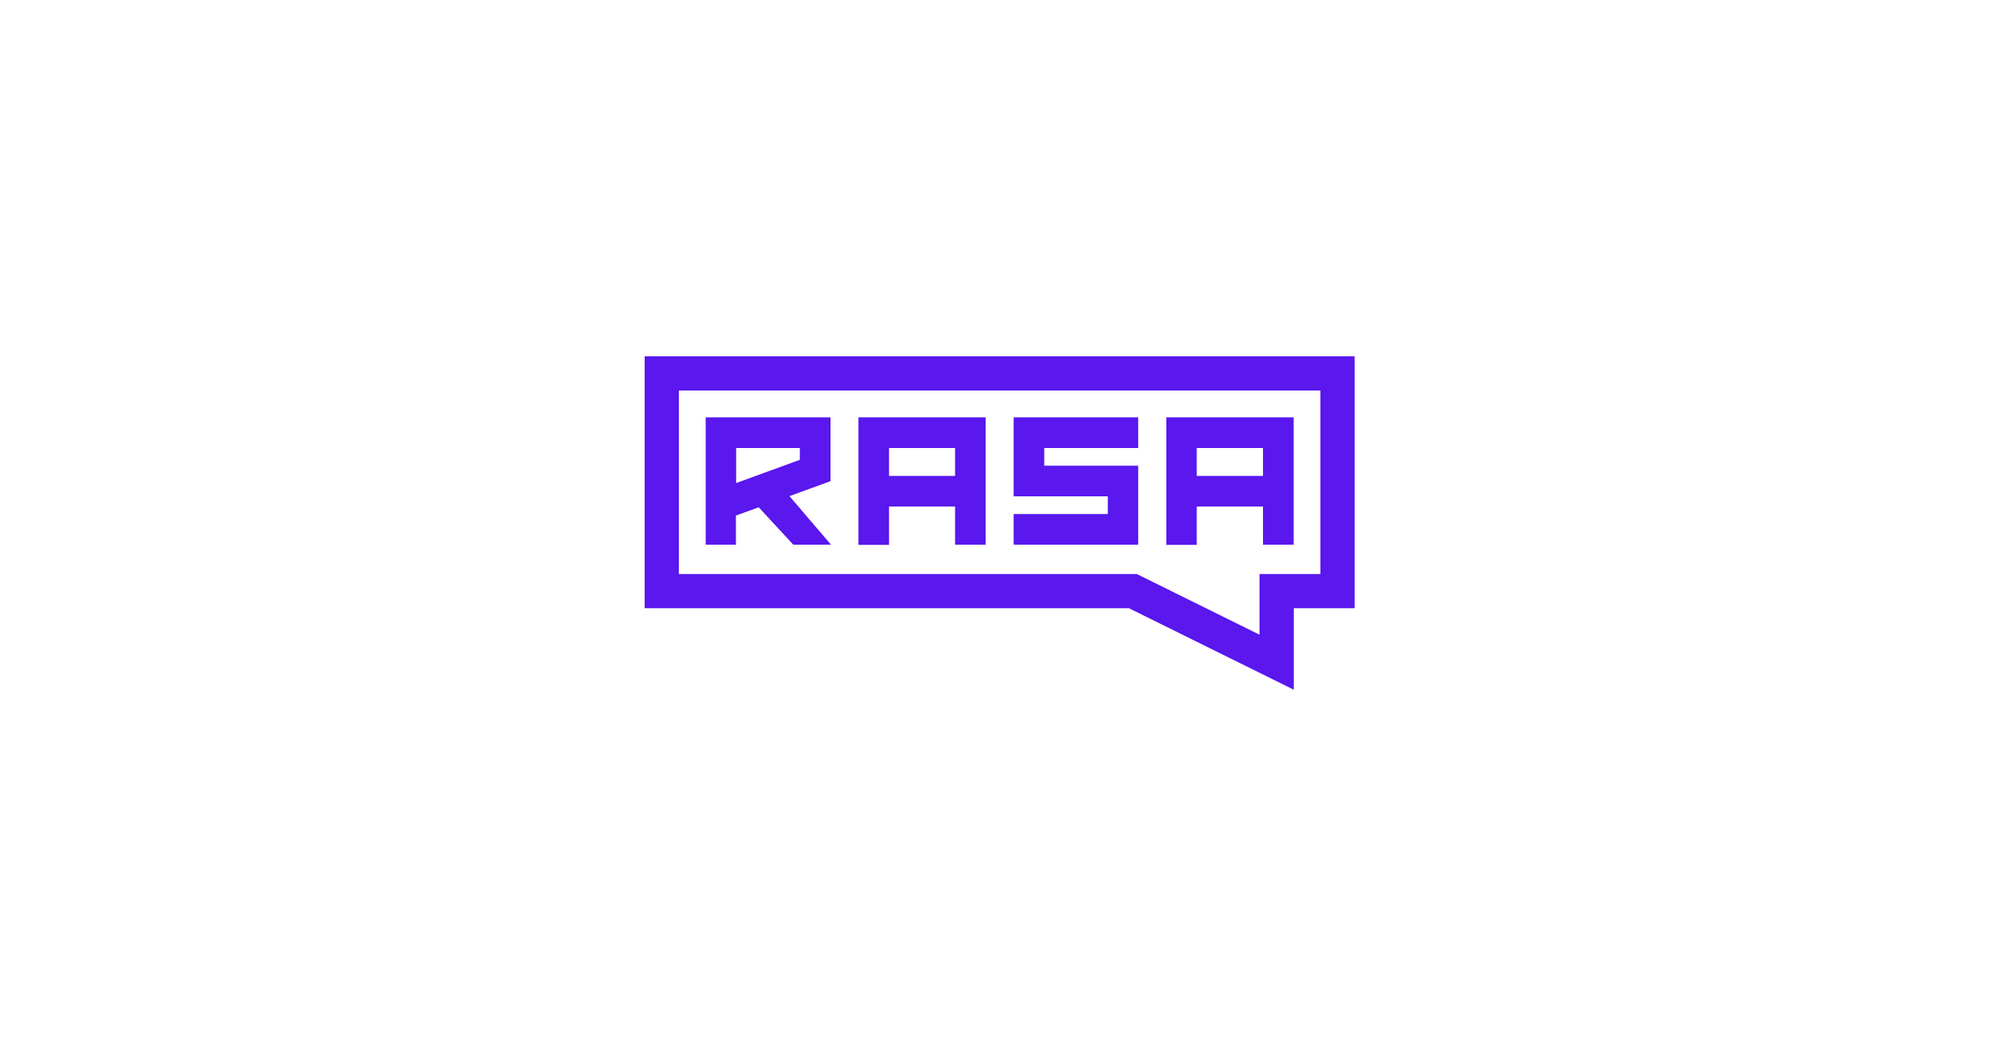 Writing a Custom Rasa Entity Extractor for Regular Expressions